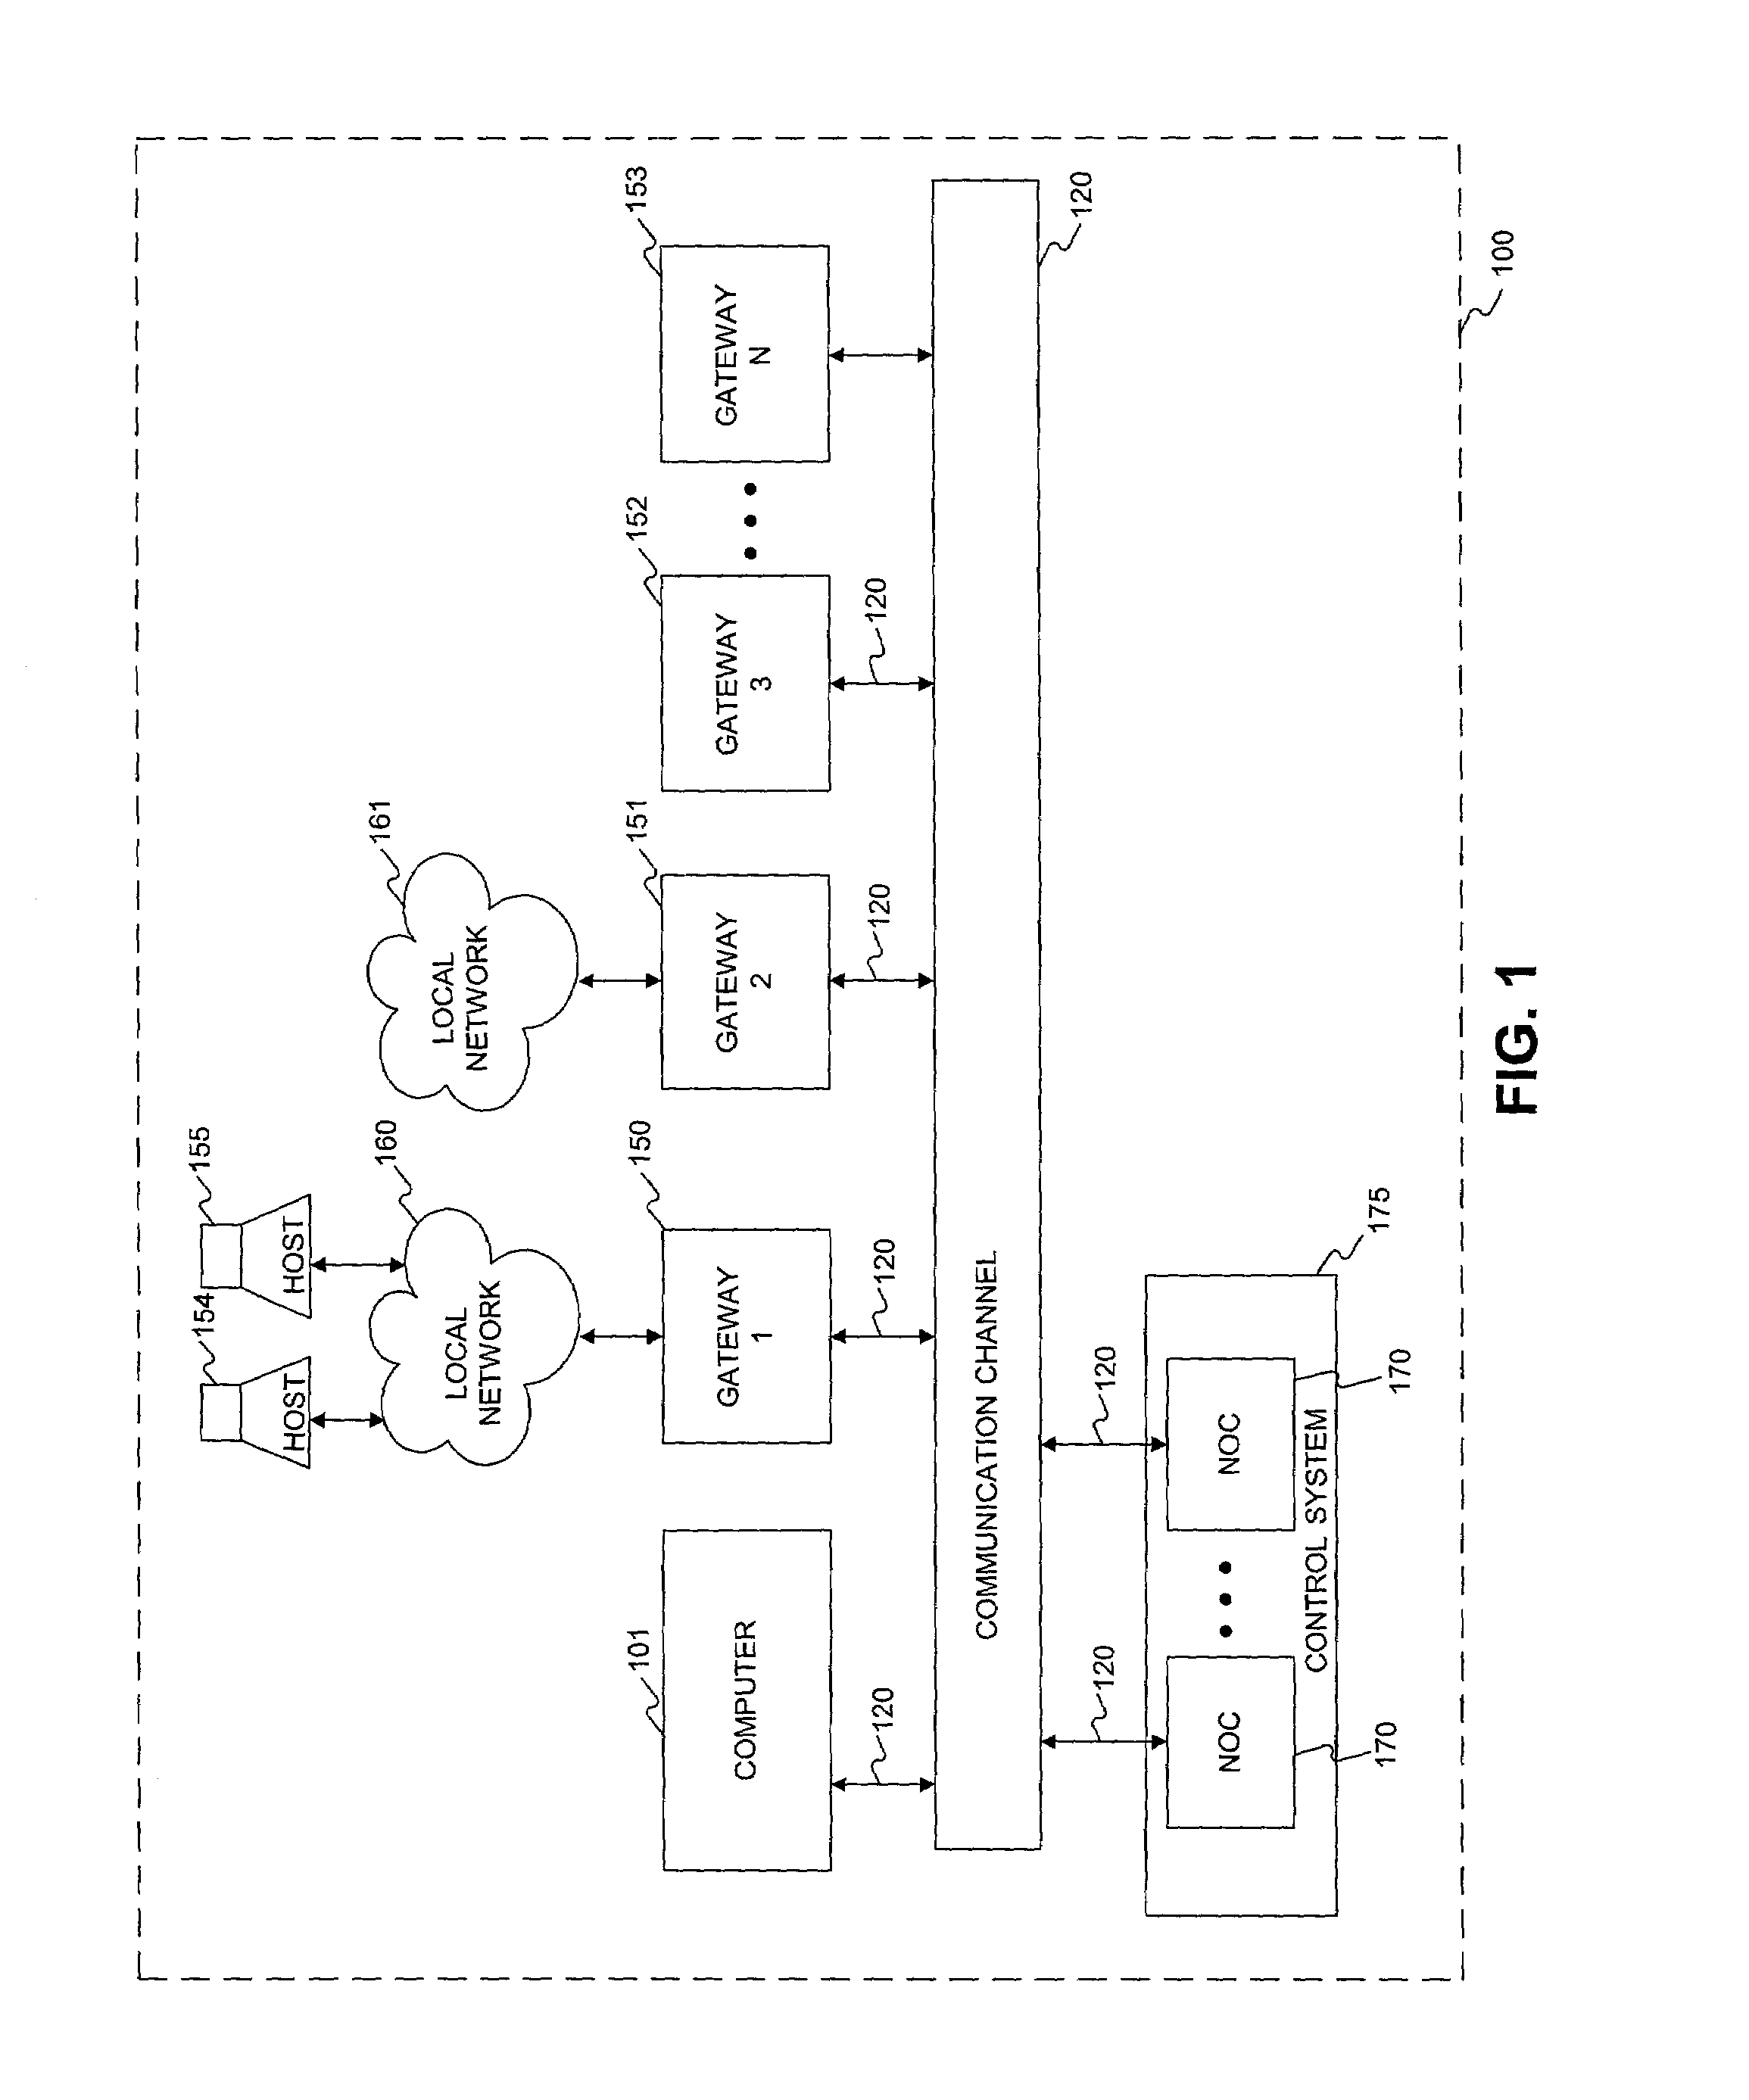 Methods and systems for using names in virtual networks